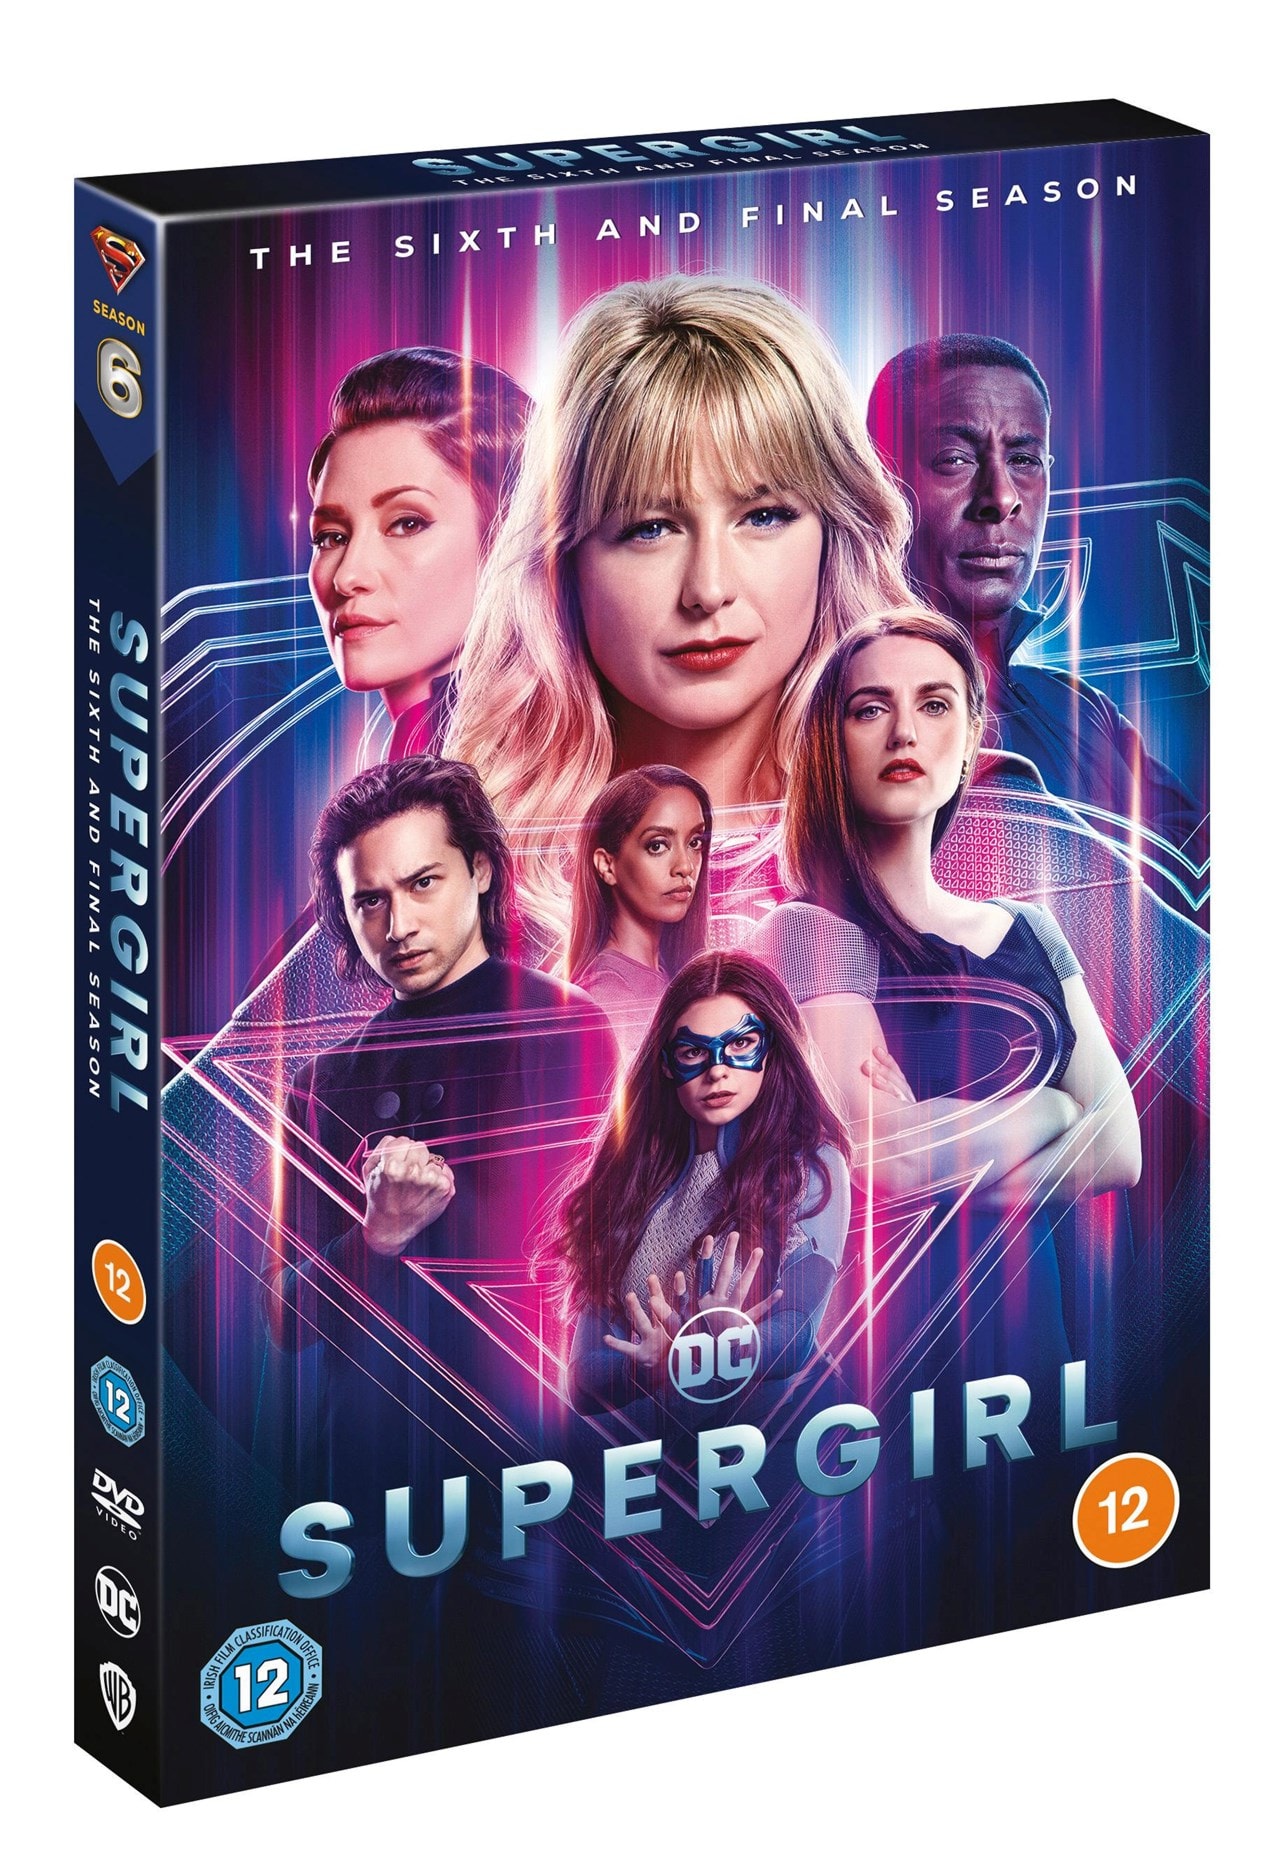 Supergirl The Sixth And Final Season Dvd Box Set Free Shipping Over Hmv Store